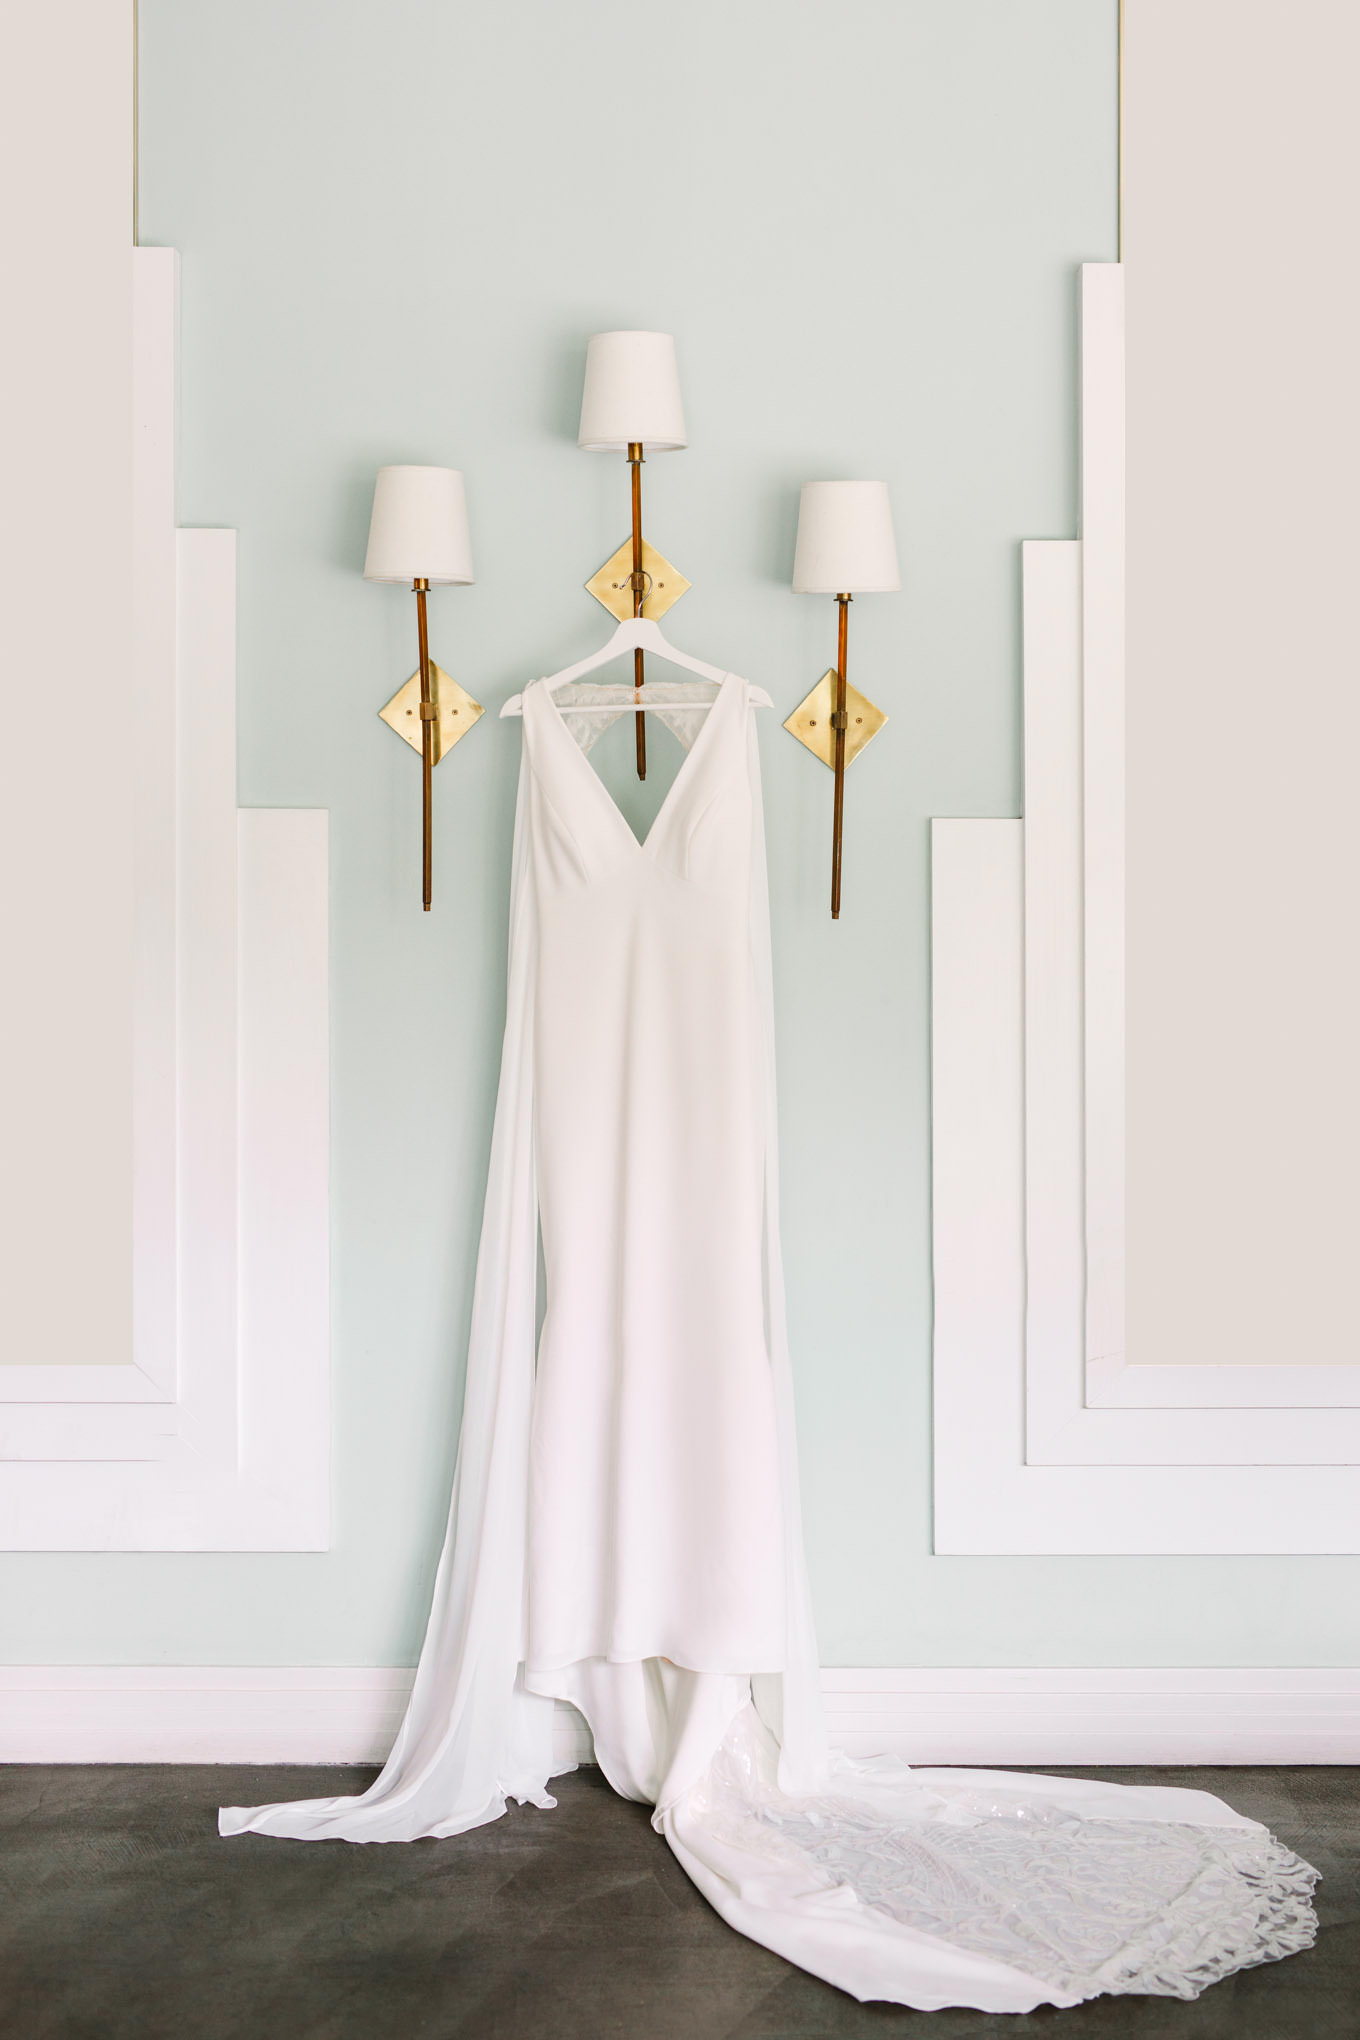 Bridal gown hanging on modern lamps | TV inspired wedding at The Fig House Los Angeles | Published on The Knot | Fresh and colorful photography for fun-loving couples in Southern California | #losangeleswedding #TVwedding #colorfulwedding #theknot   Source: Mary Costa Photography | Los Angeles wedding photographer